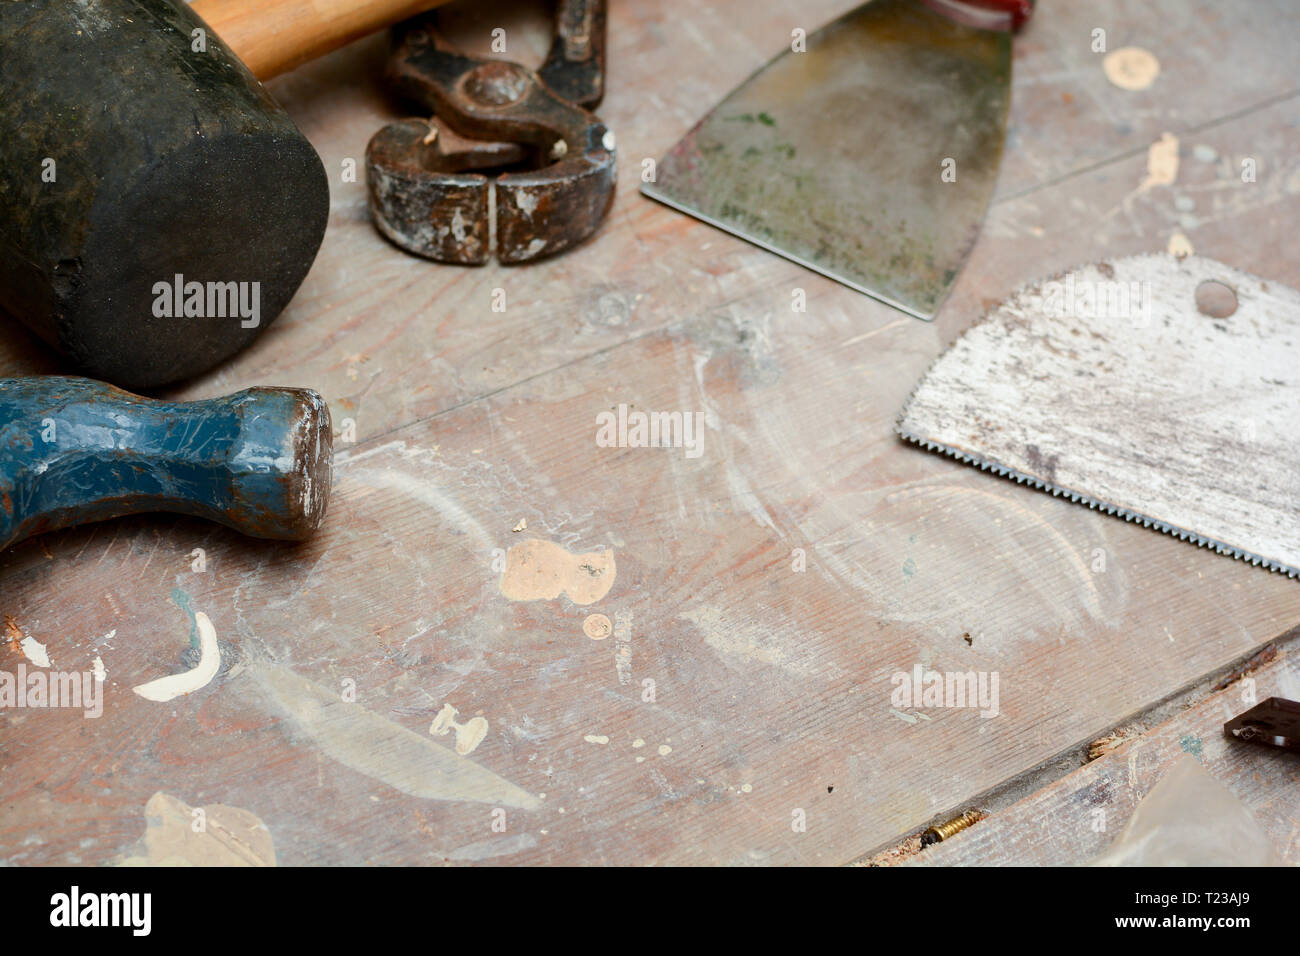 DIY work tools, used tools on a work bench Stock Photo